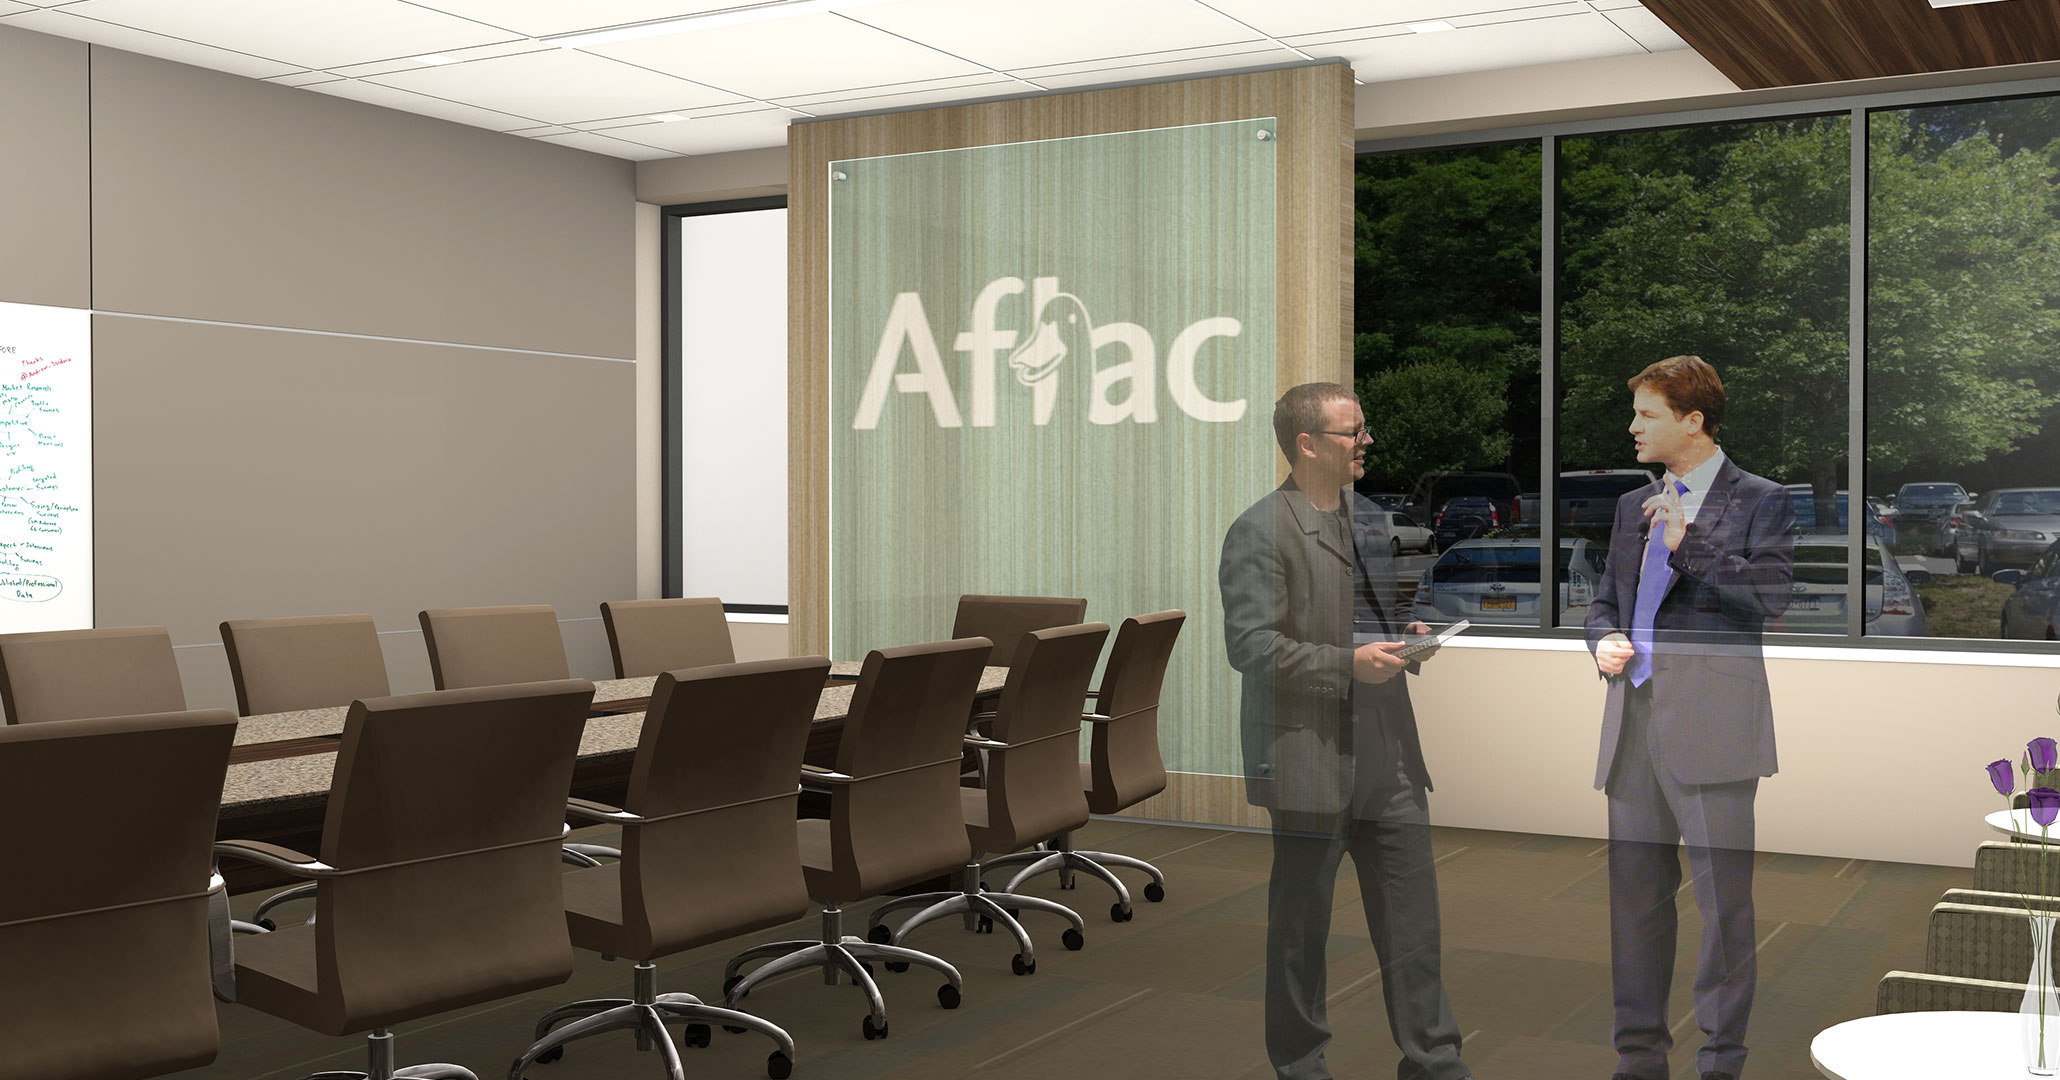 Aflac and Boudreaux work closely together to design spaces appropriate for expansion.